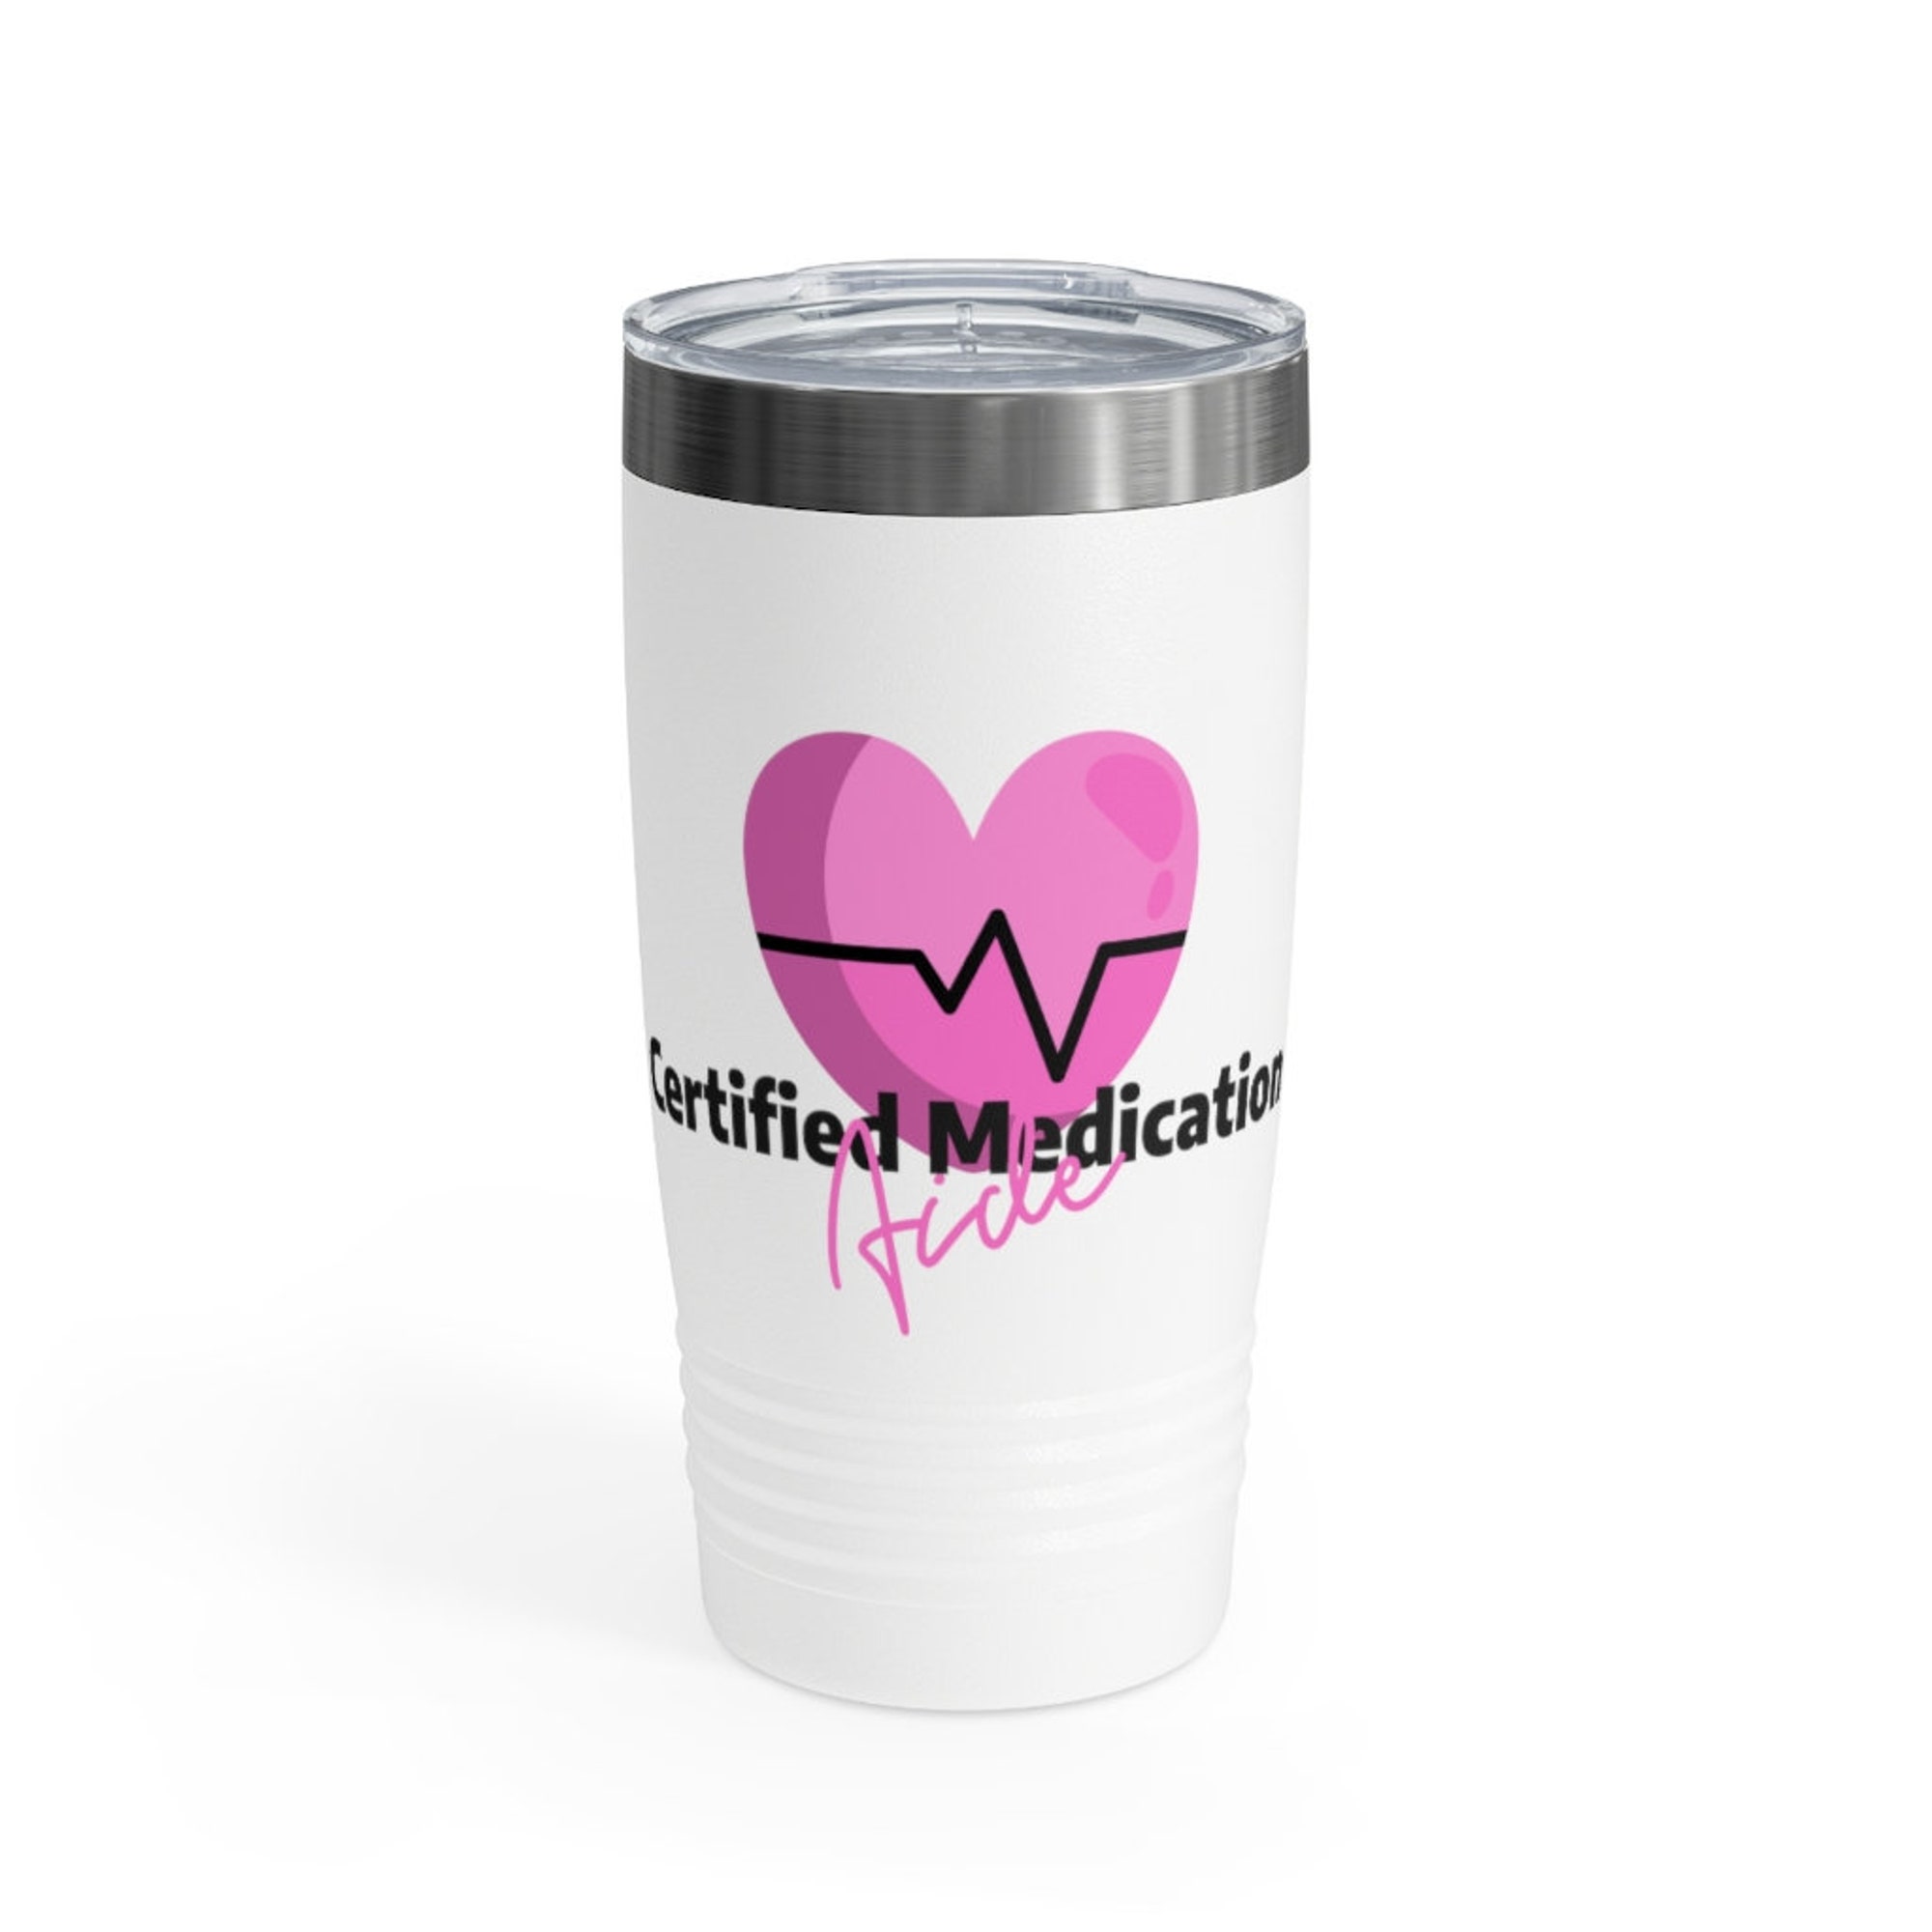 Certified Medication Aide Tumbler